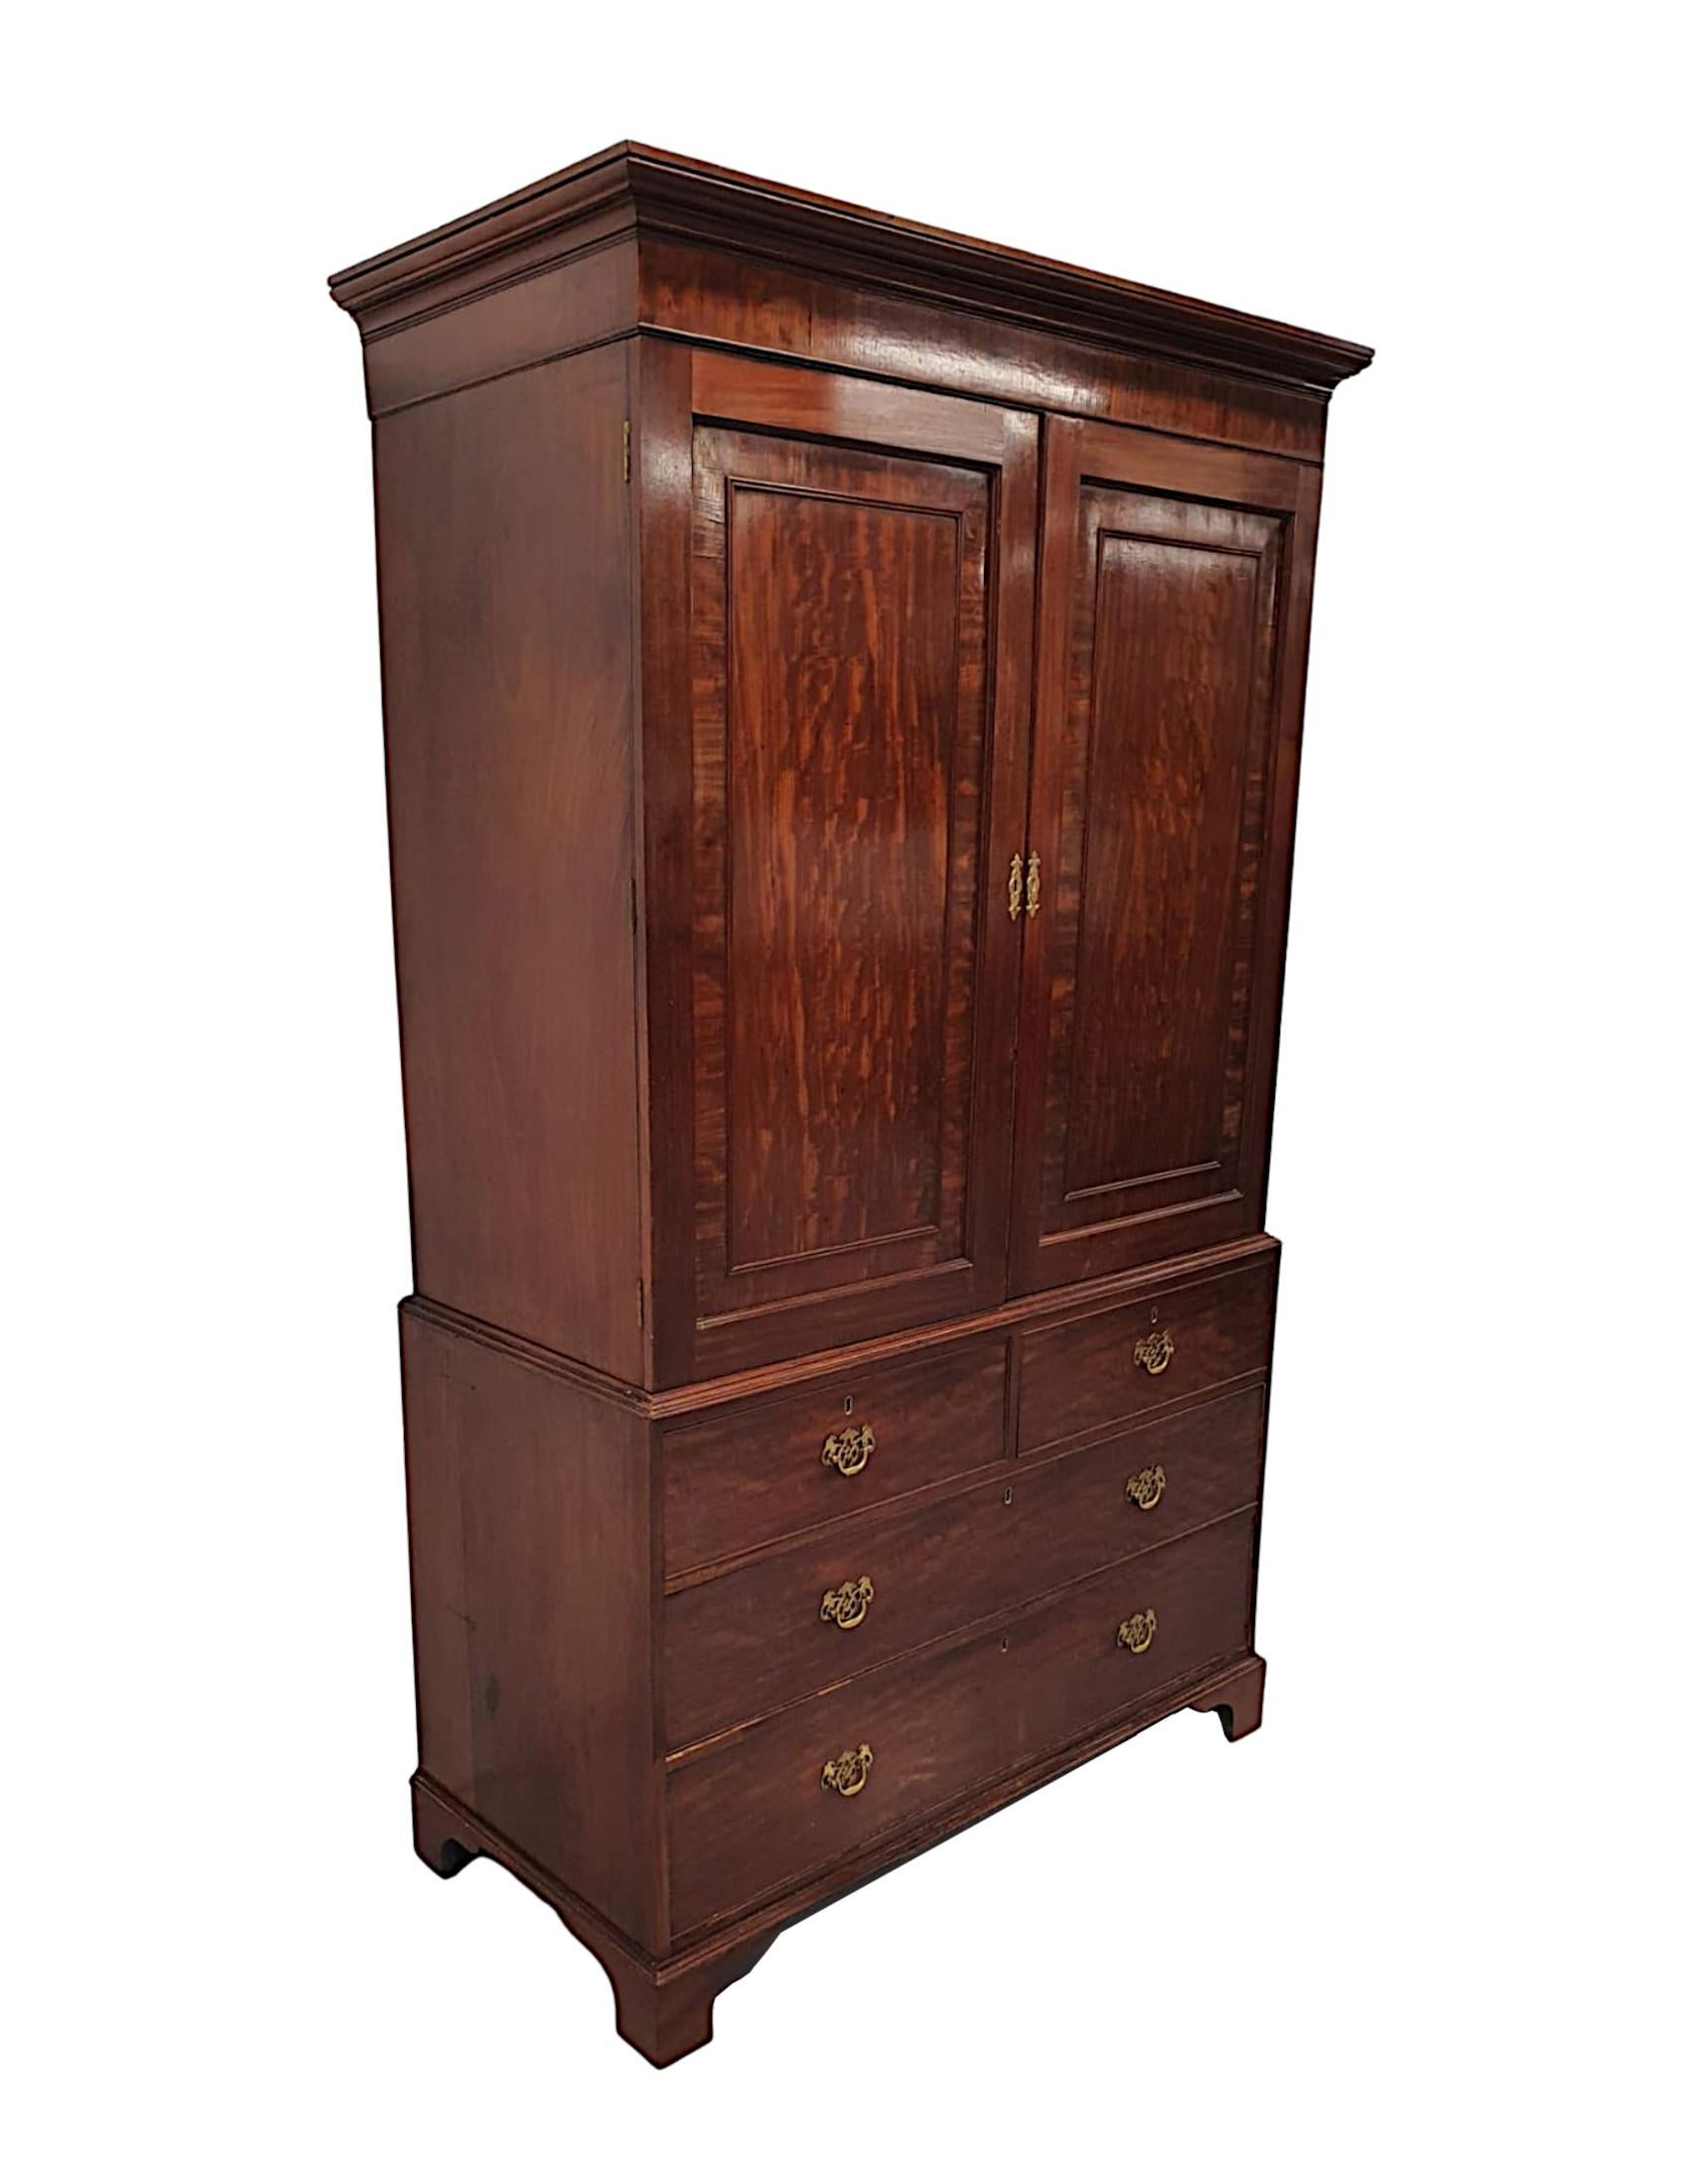 A very fine early 19th century mahogany linen press or wardrobe, of exceptional quality, fabulously hand carved and crossbanded throughout with gorgeously rich patination and grain. The upper section with a stepped and moulded cavetto pediment above